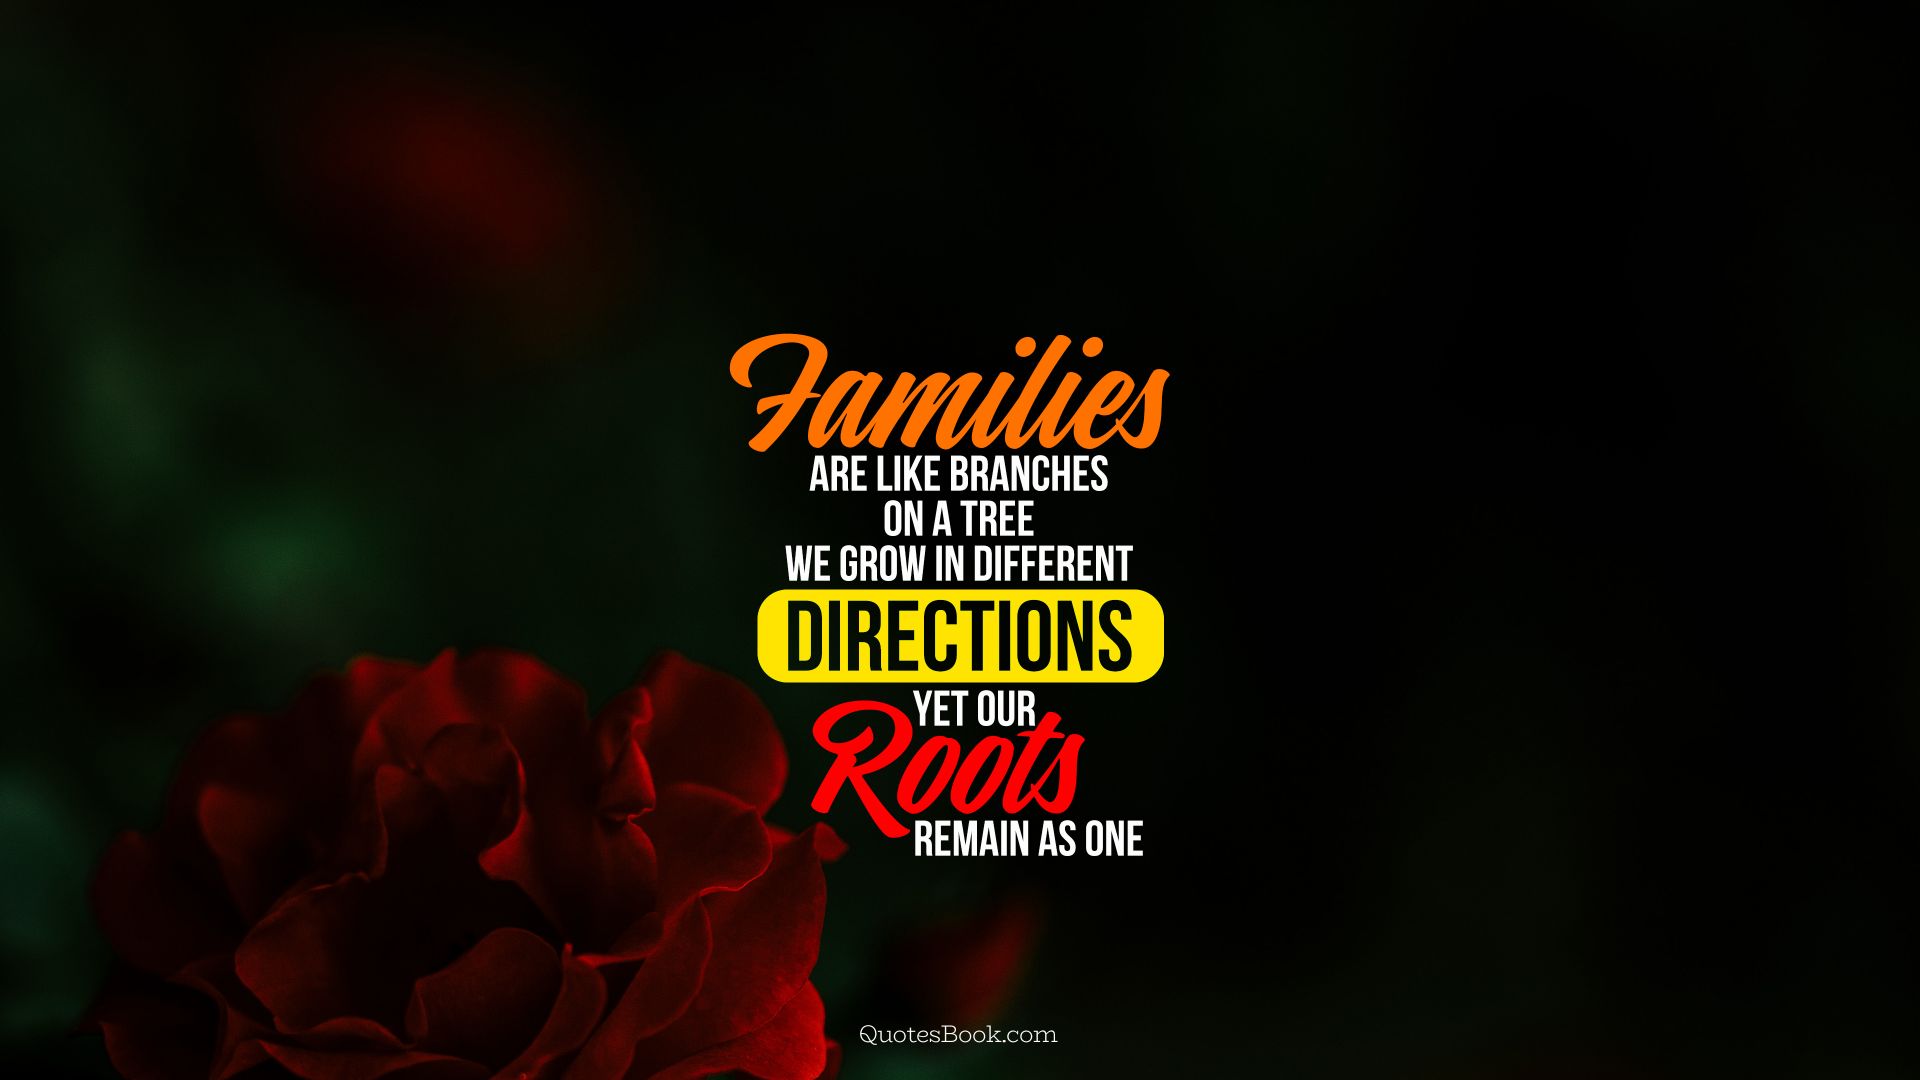 Families are like branches on a tree we grow in different directions yet our roots remain as one